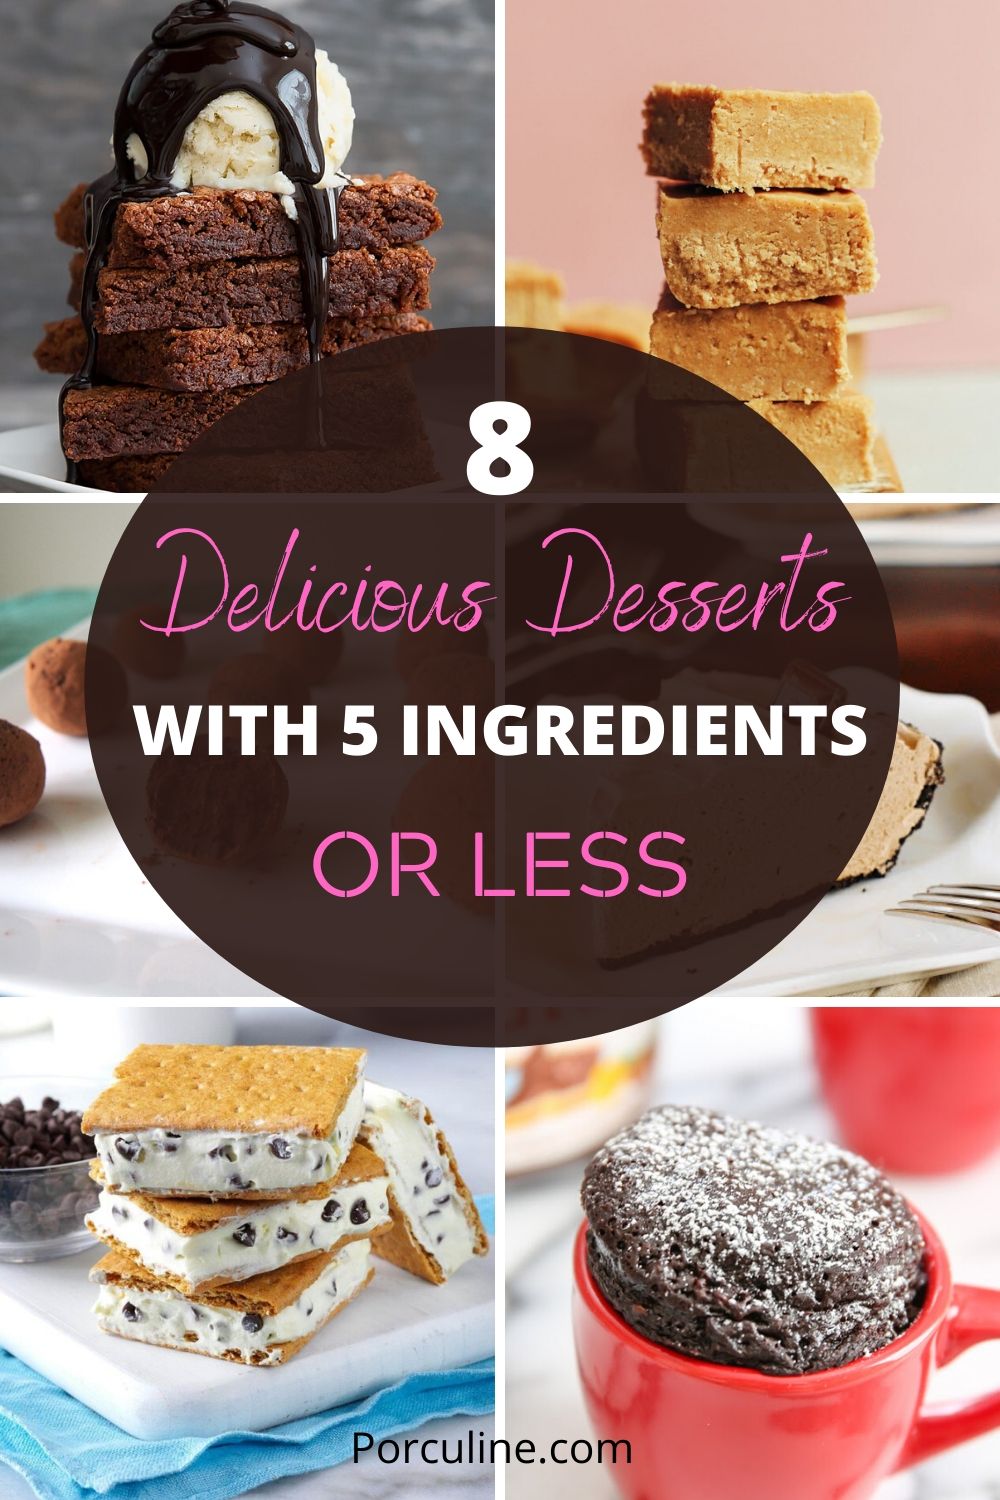 8 Delicious Desserts With 5 Ingredients or Less Pinterest Post